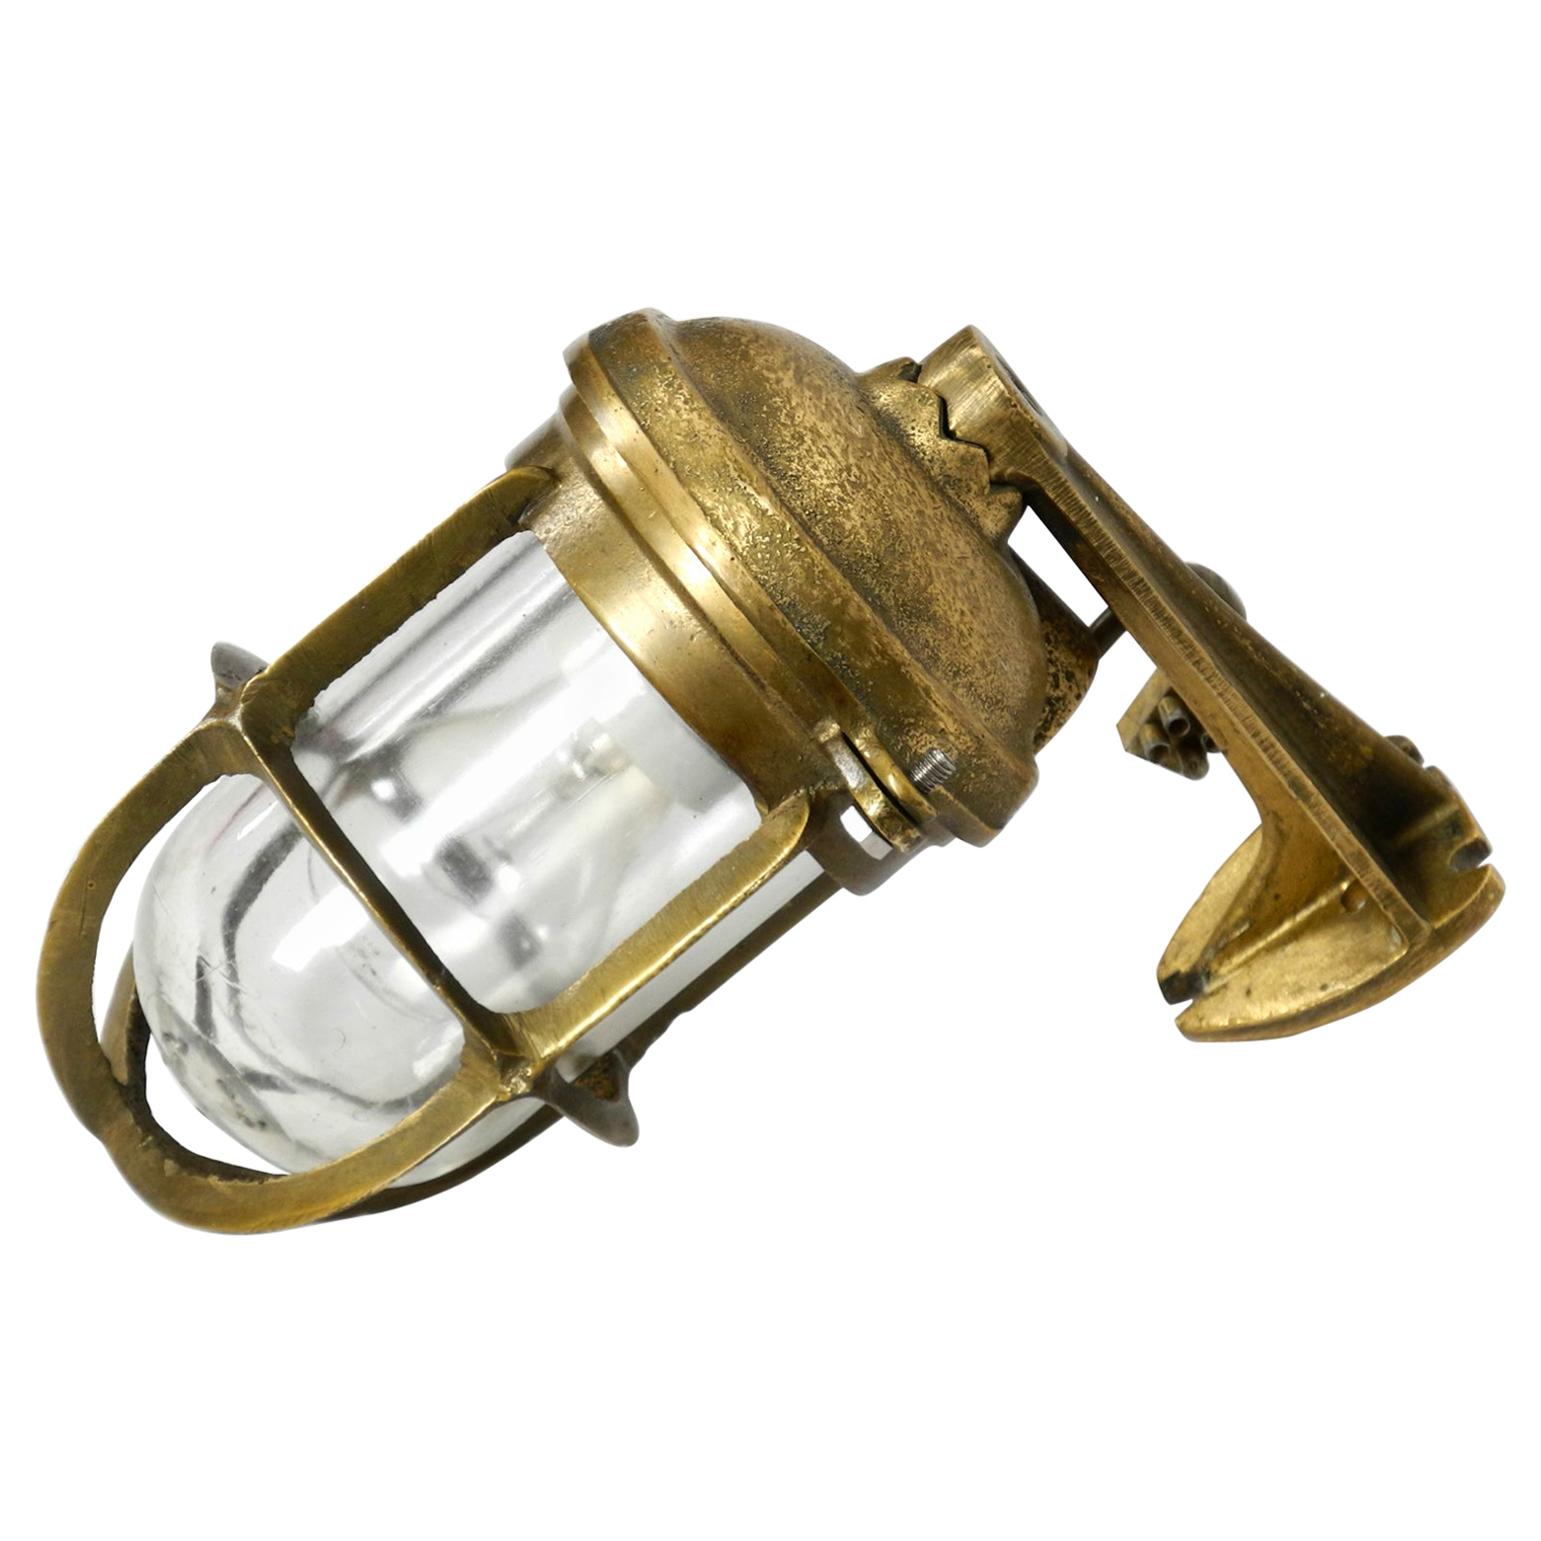 Heavy 1950s Maritime Ship Wall Lamp Made of Cast Brass and with Glass Shade For Sale